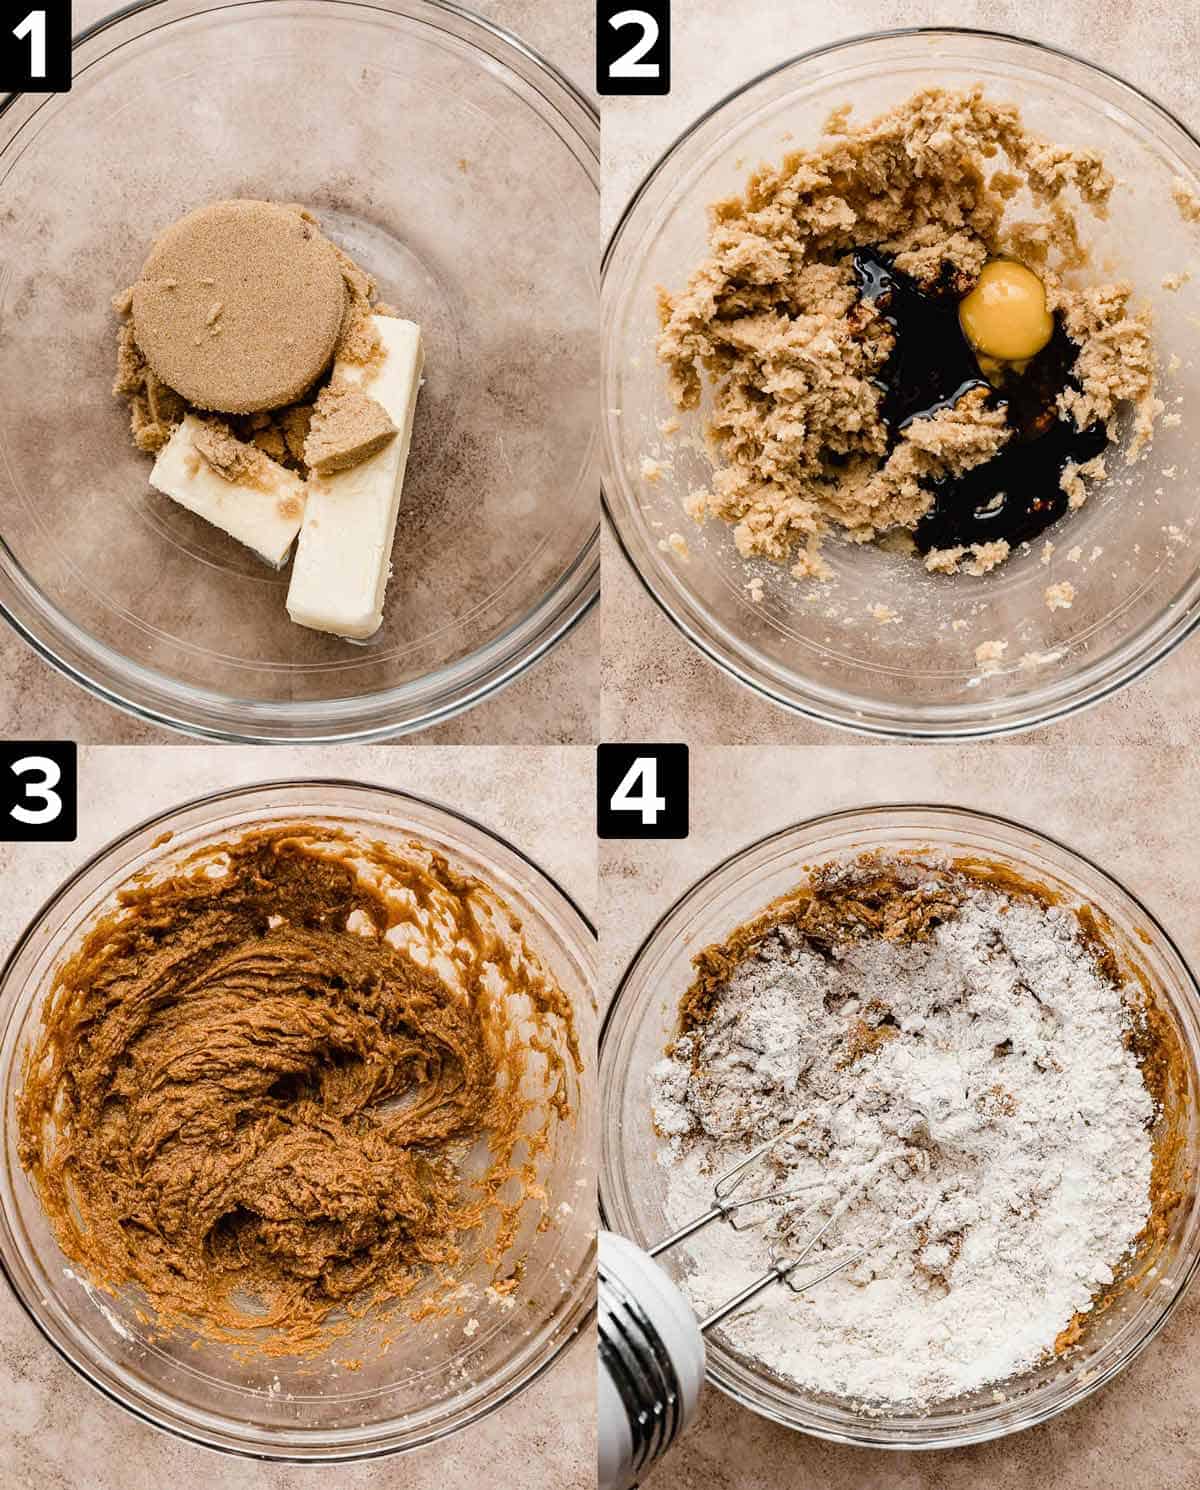 Four images showing the making of gingersnap cookie dough.